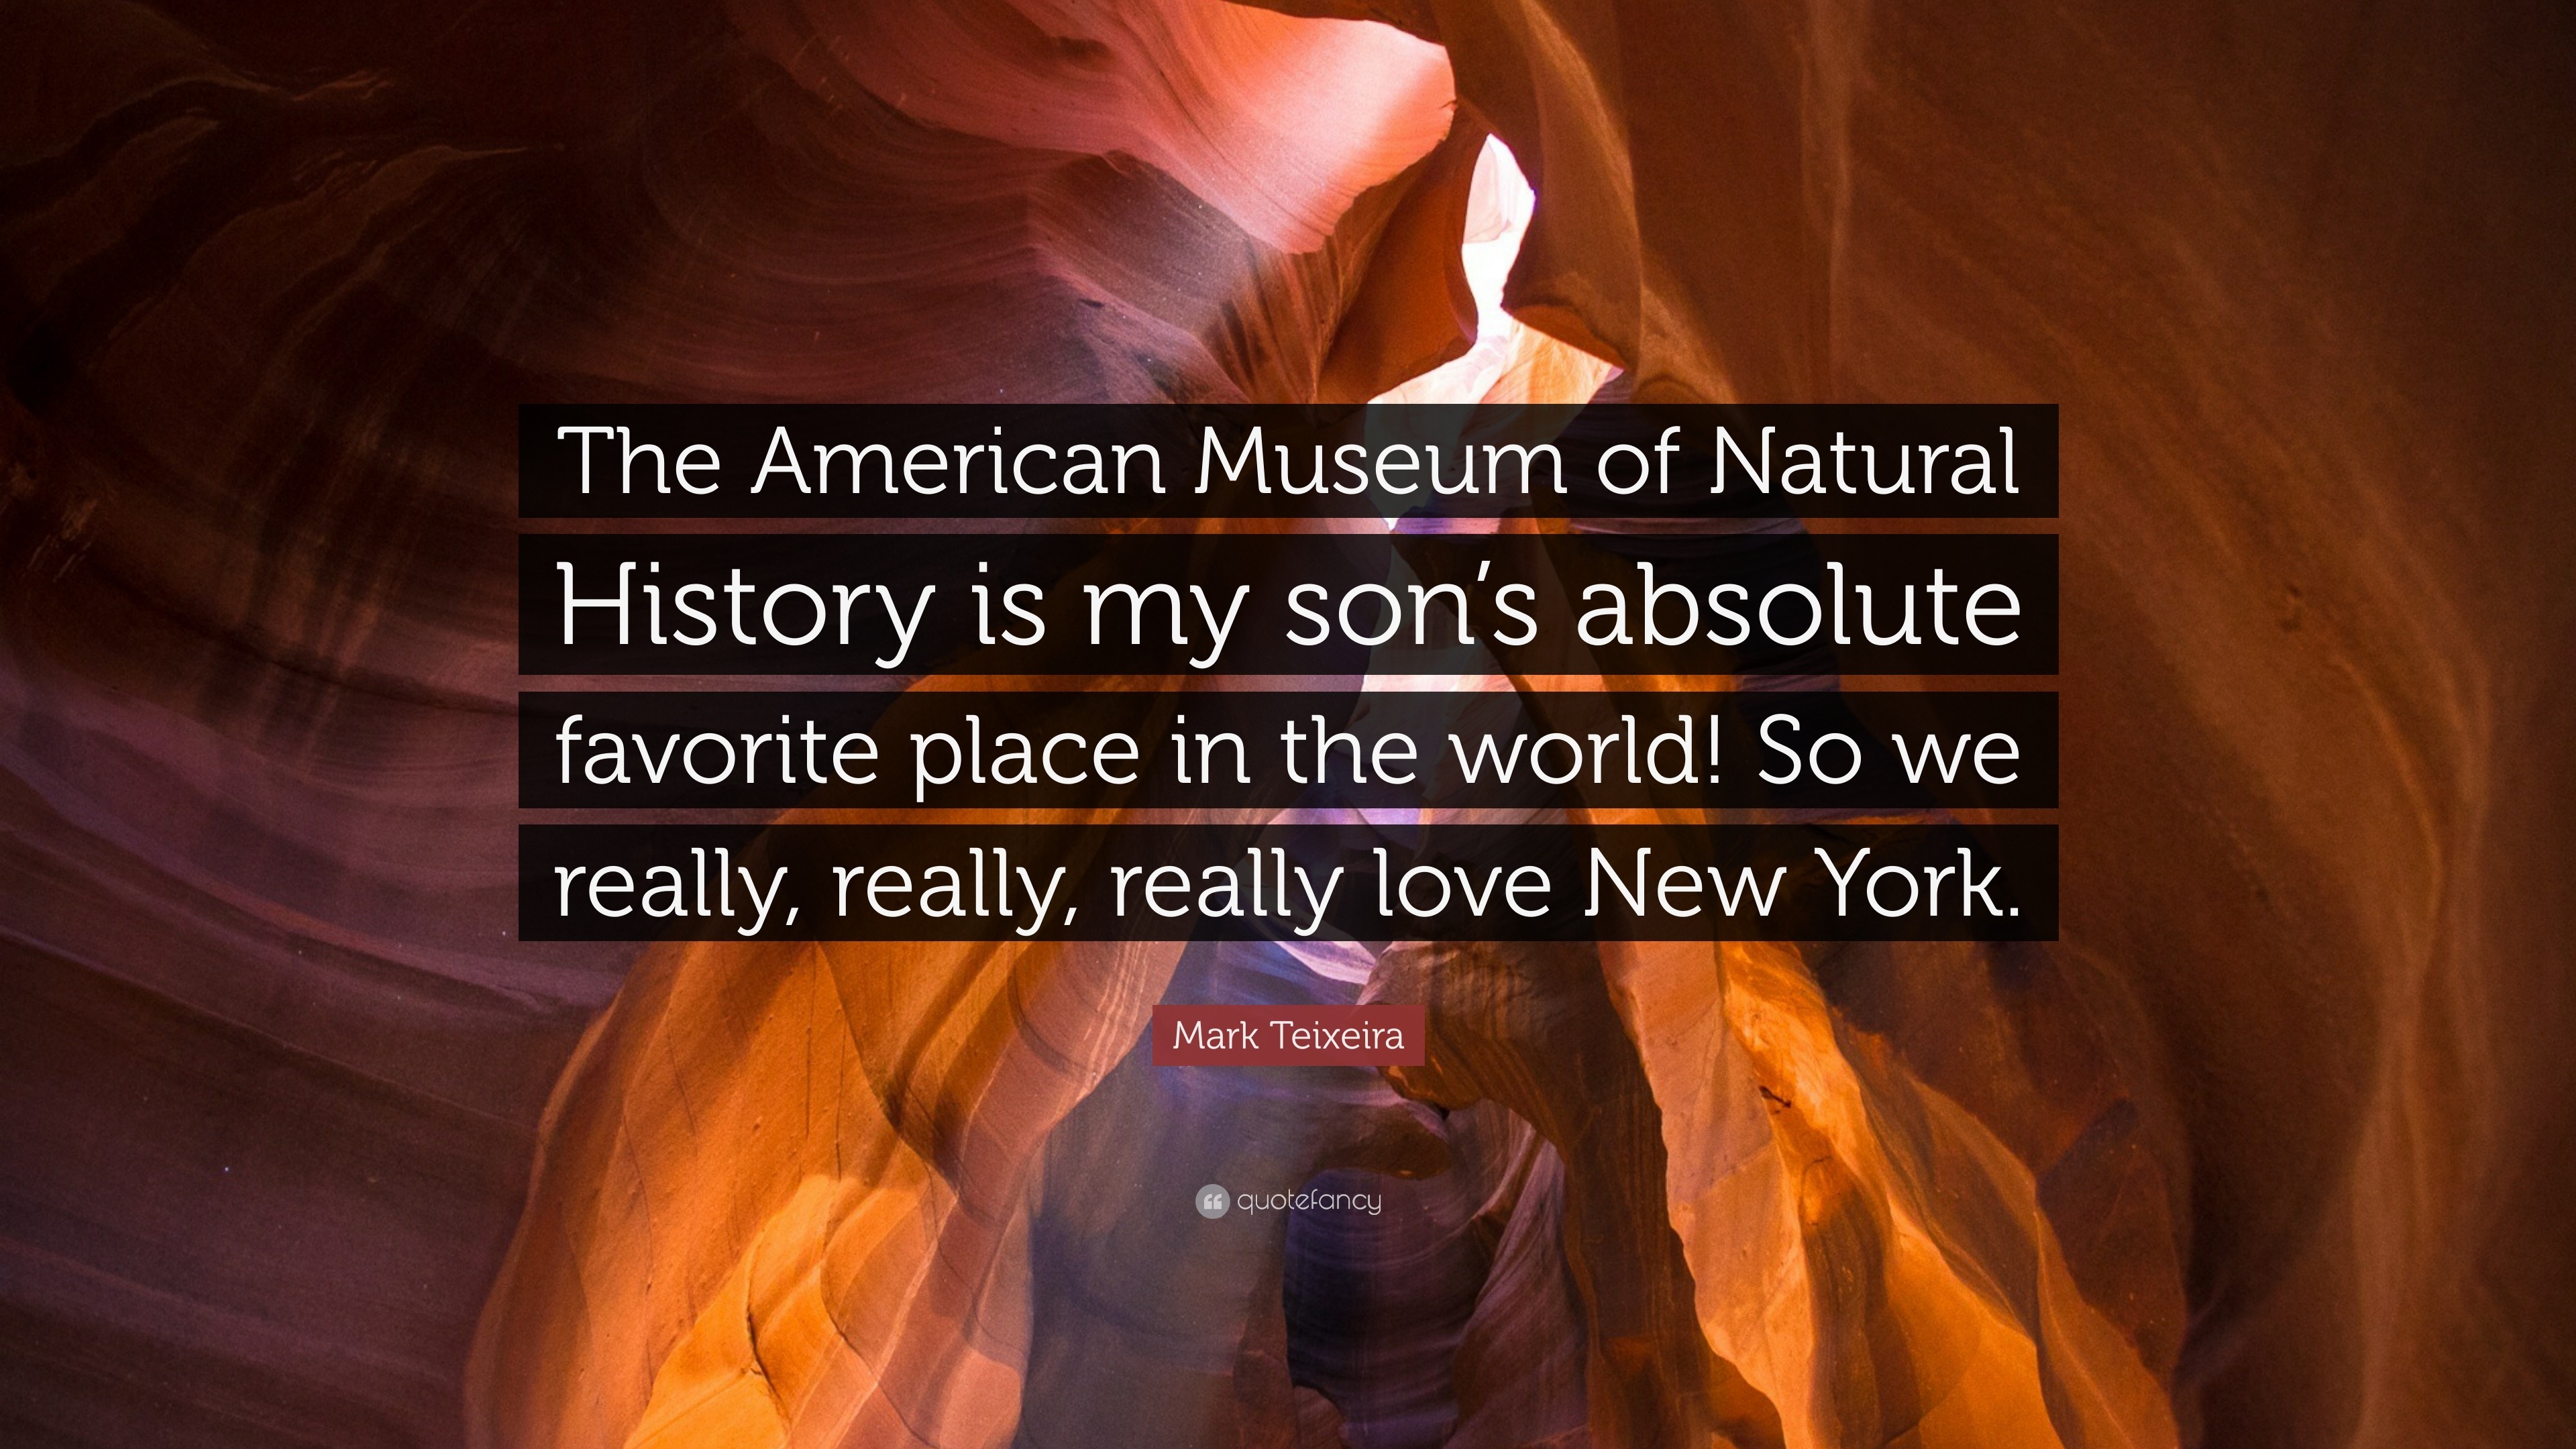 Mark Teixeira Quote: “The American Museum of Natural History is my son's  absolute favorite place in the world! So we really, really, really lo”